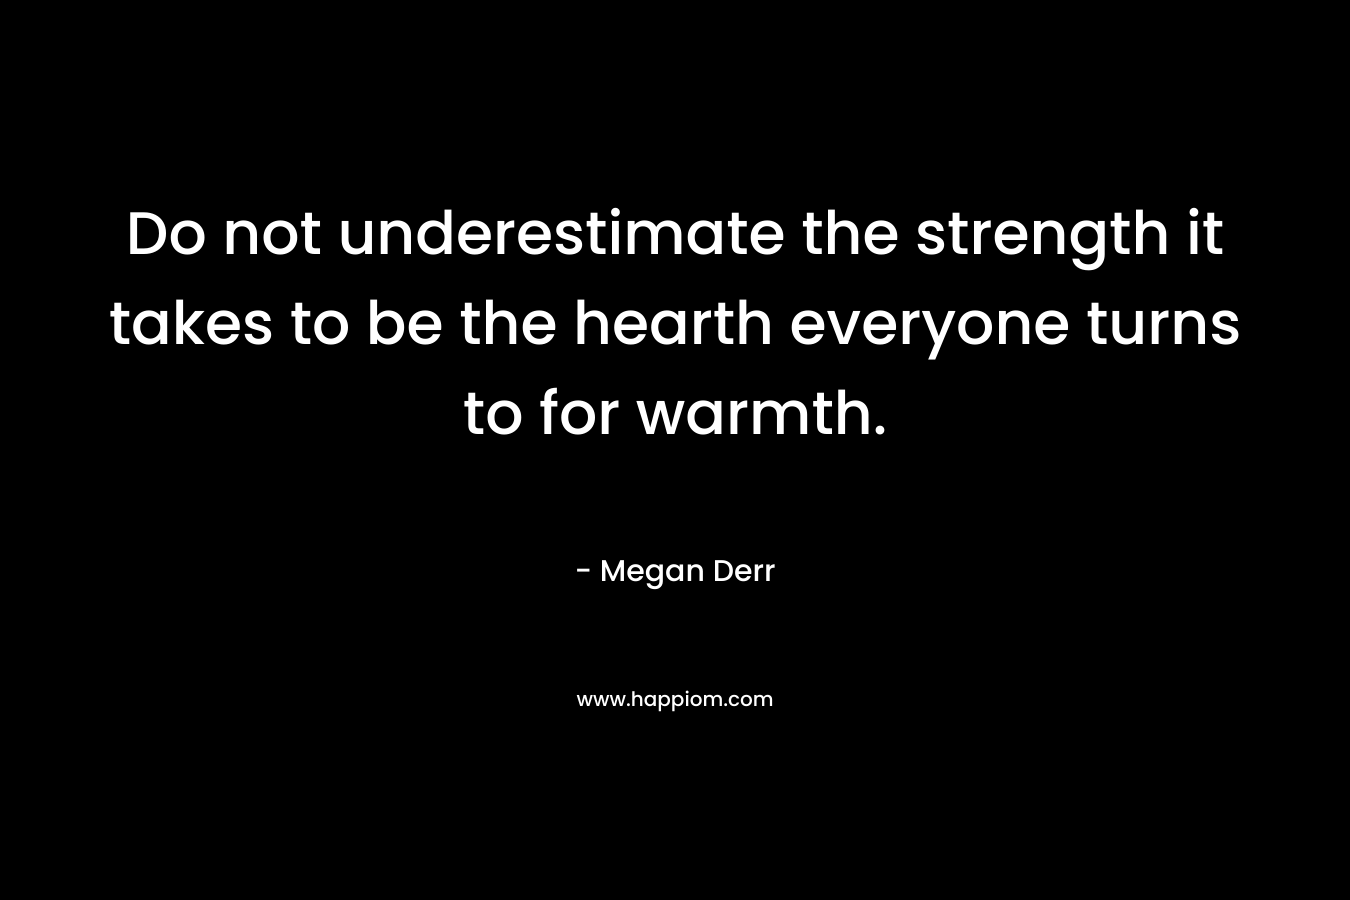 Do not underestimate the strength it takes to be the hearth everyone turns to for warmth.